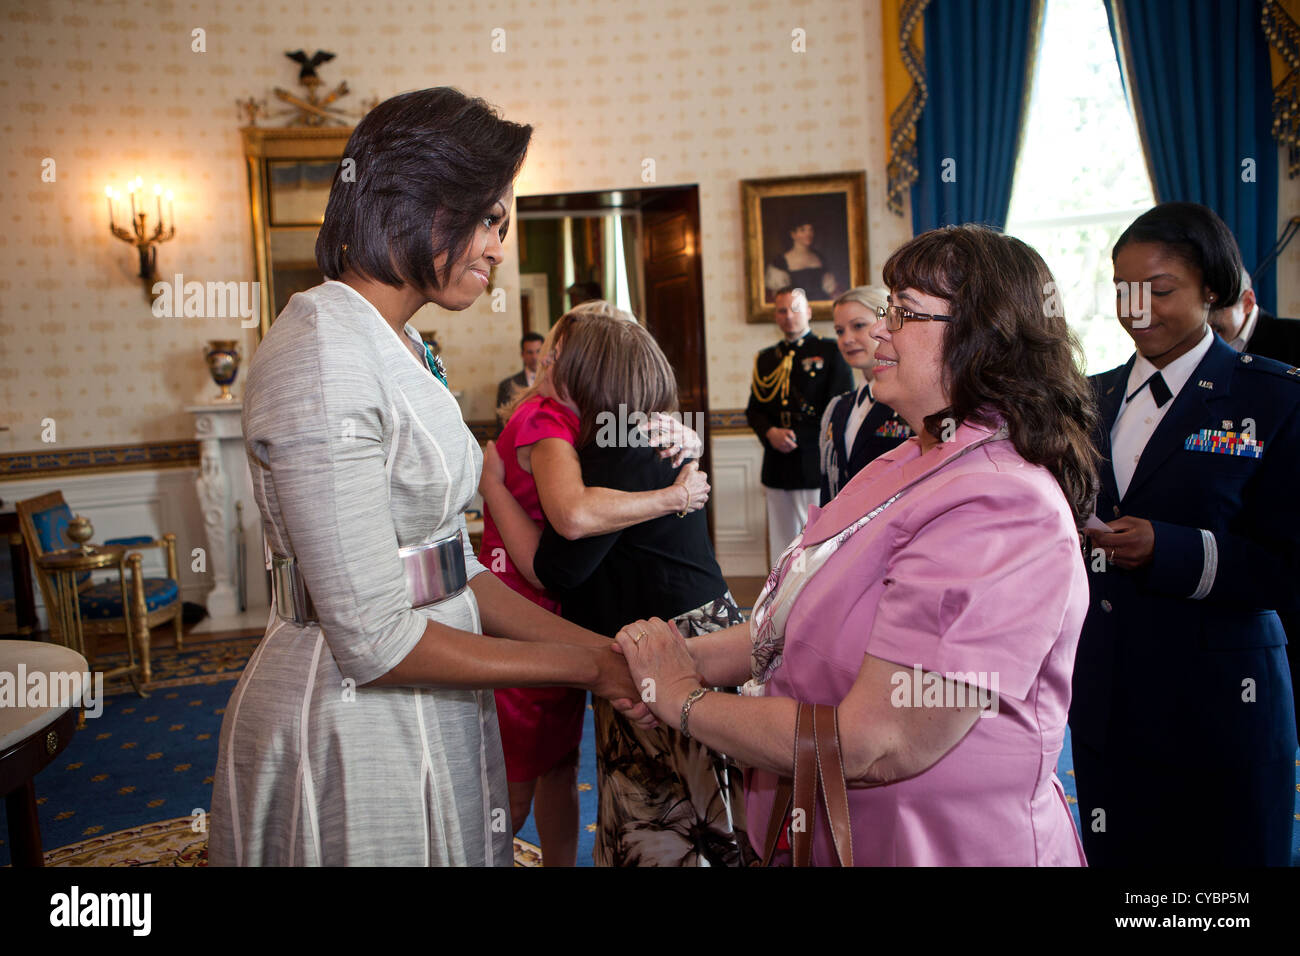 First Lady Michelle Obama greets guests May 6, 2011 in the Blue Room of the White House during a Mother's Day Tea for military spouses, relatives, and friends. Stock Photo